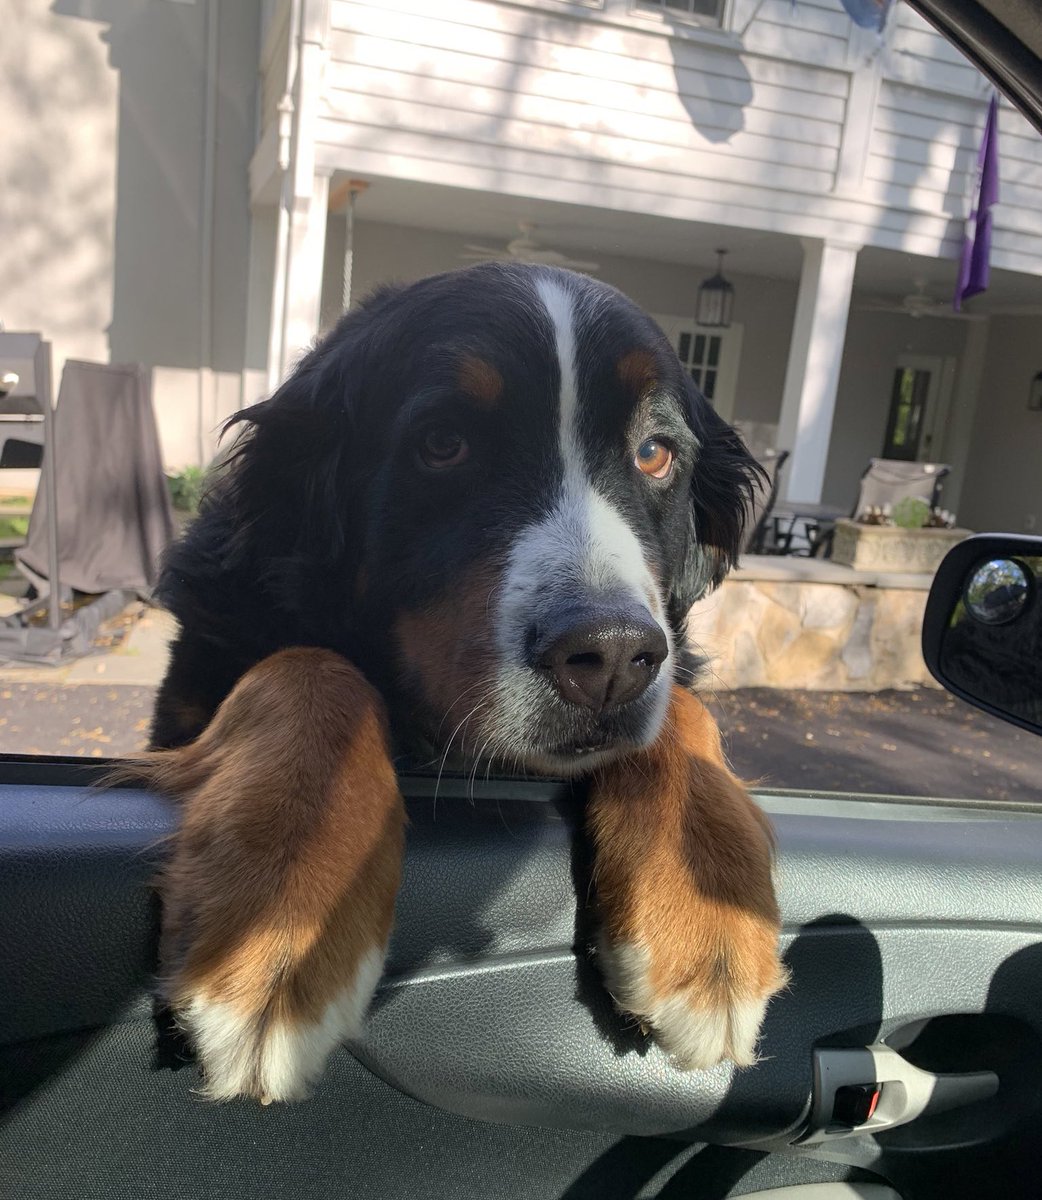 This is Frisco. He’s the valet. If you wouldn’t mind putting it in bark and leaving the keys inside he’ll take care of everything. 13/10 would tip well